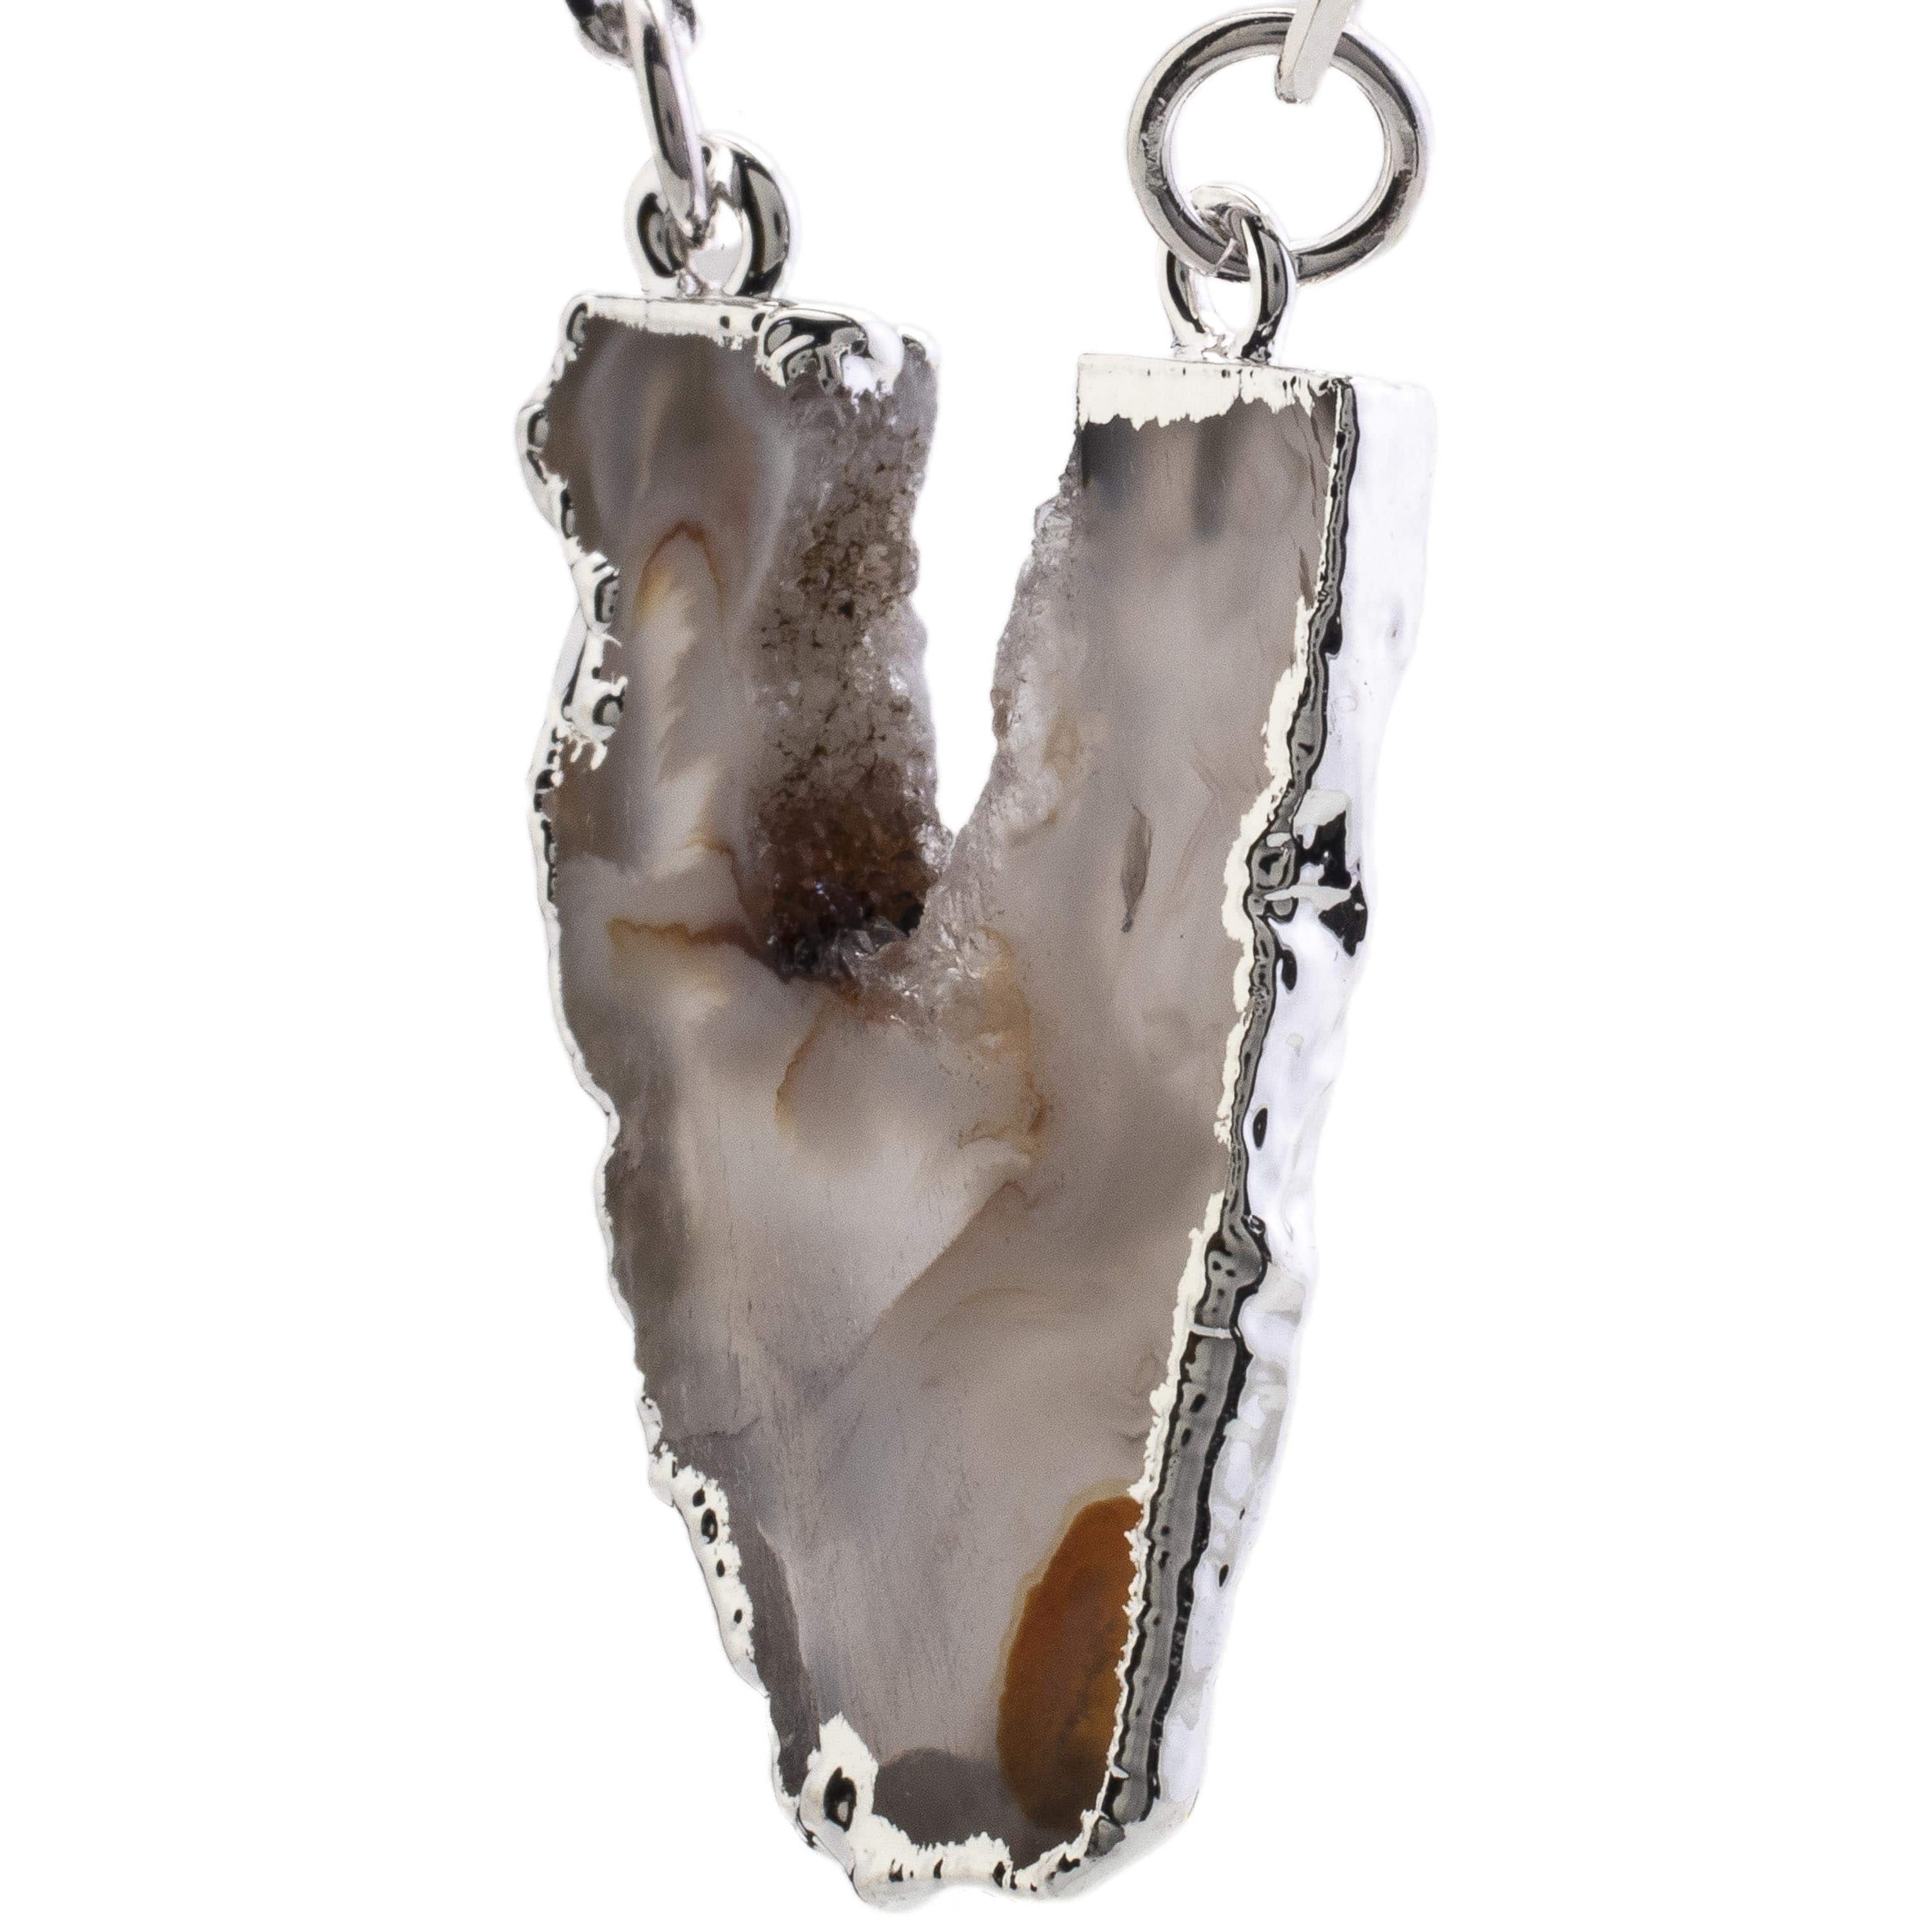 Kalifano Crystal Jewelry Agate Geode Slice Necklace CJN-2029-AG